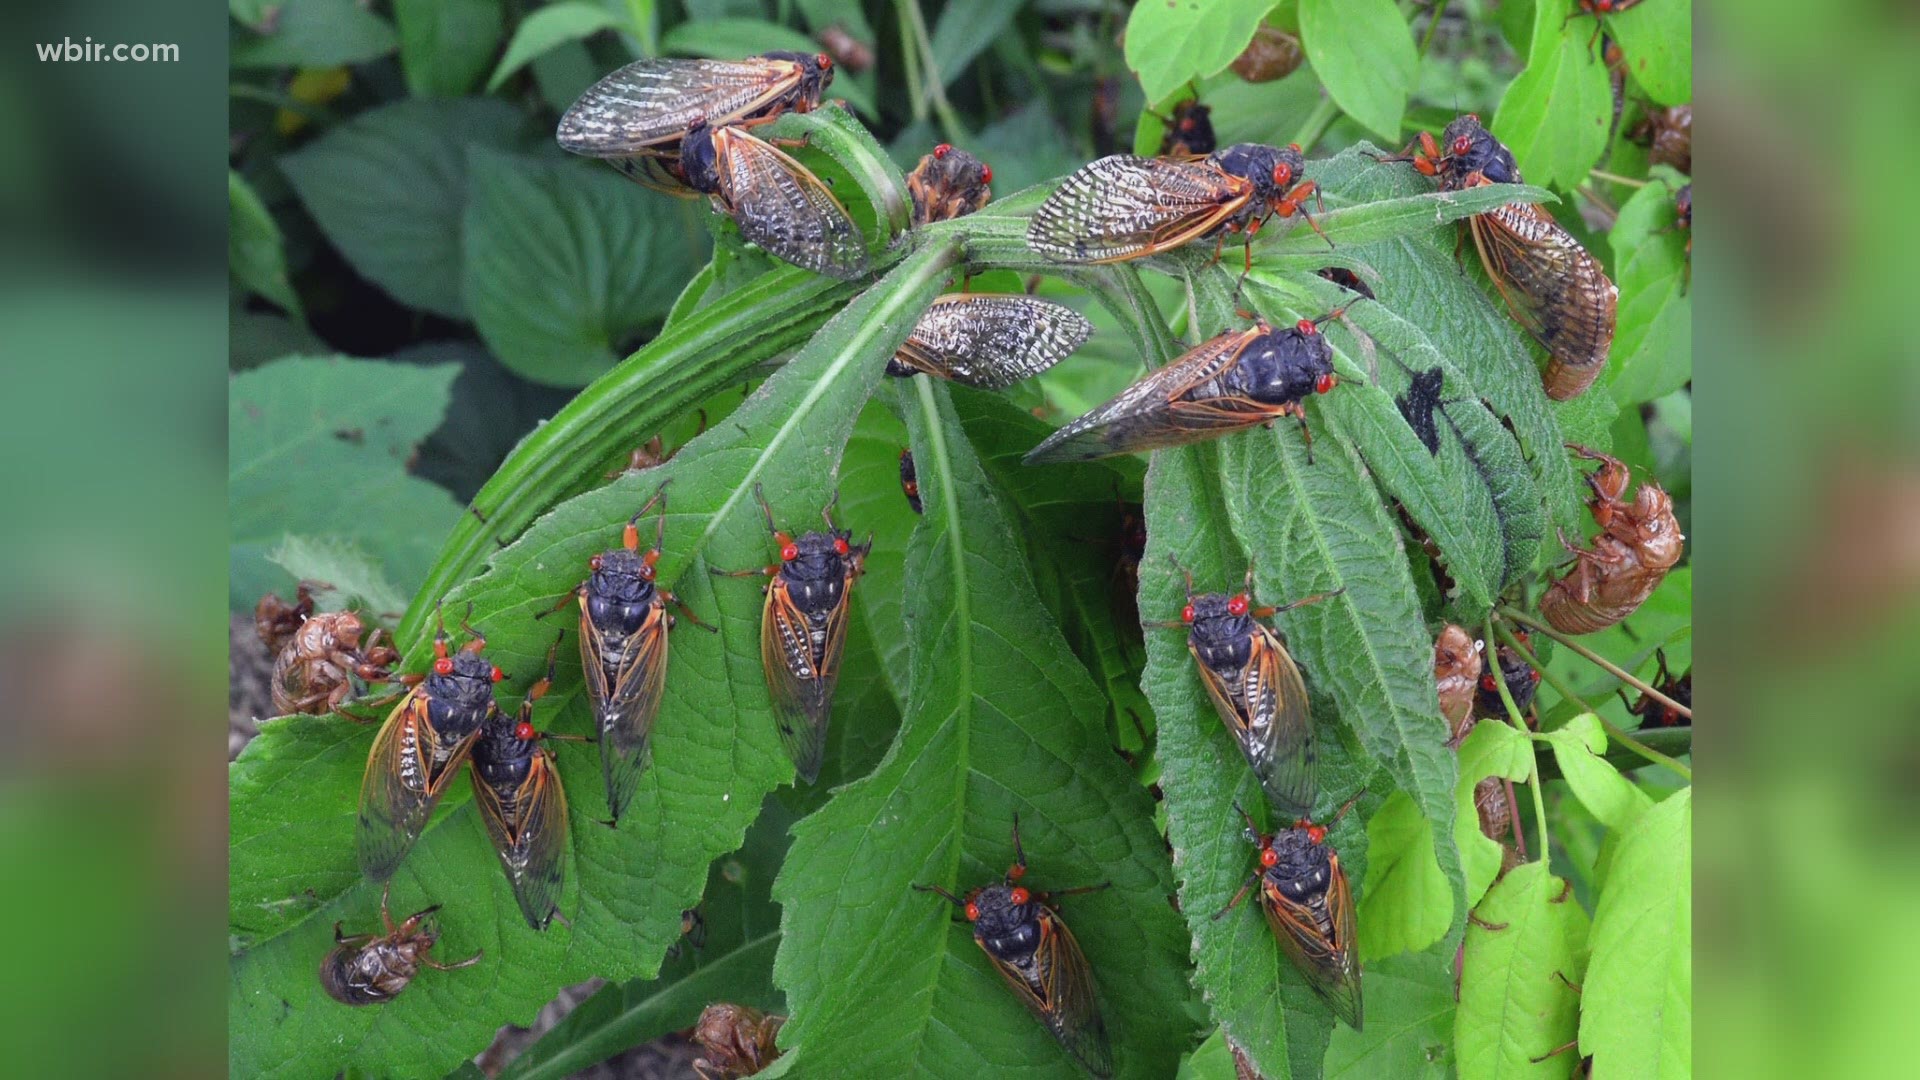 You've heard it before and you'll hear it again! The 17-year cicadas will start emerging in East Tennessee this May.